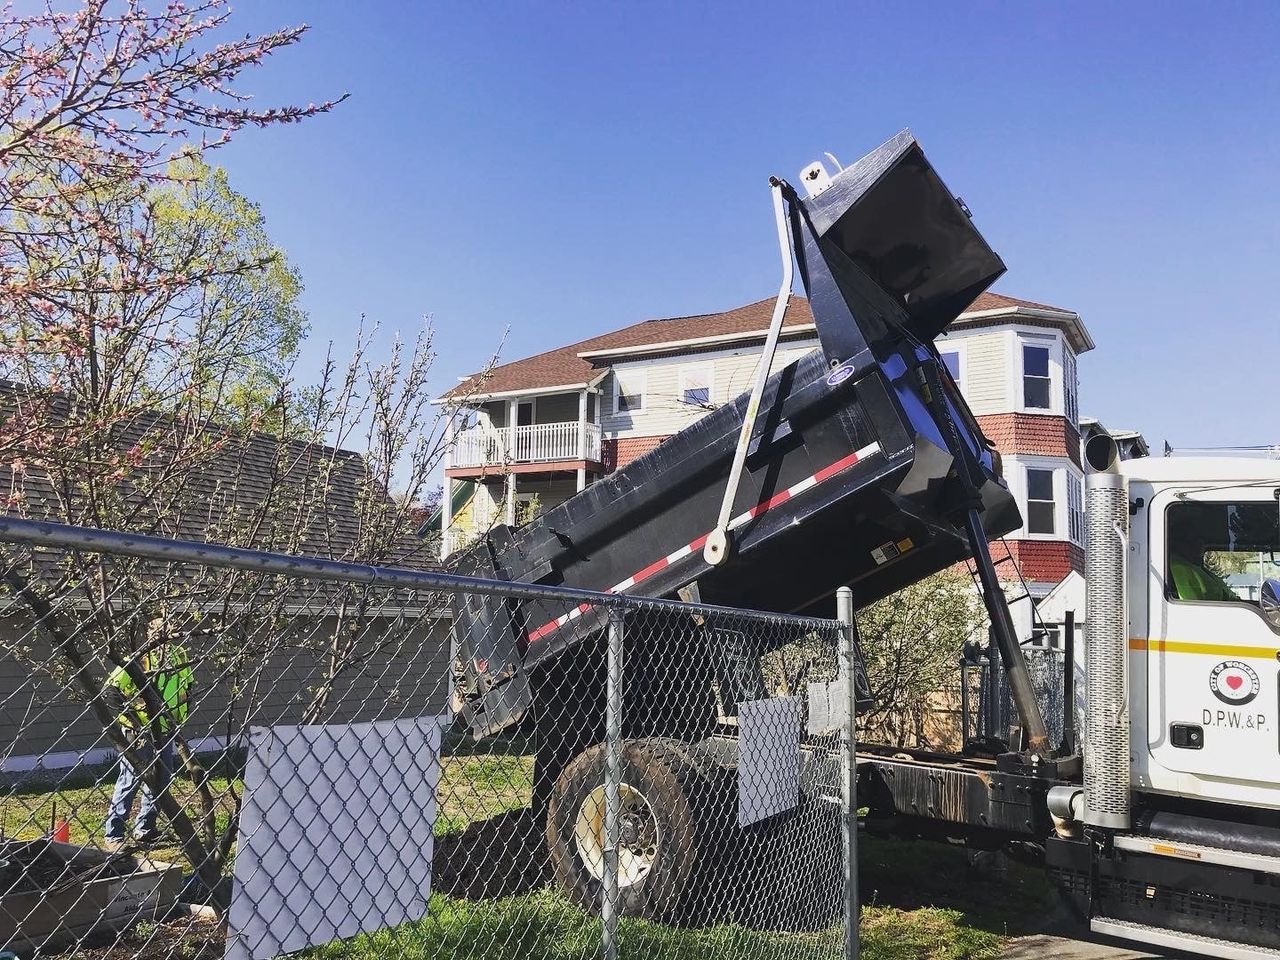 Read more about the article City’s DPW & Parks Delivers compost to WCG community garden sites